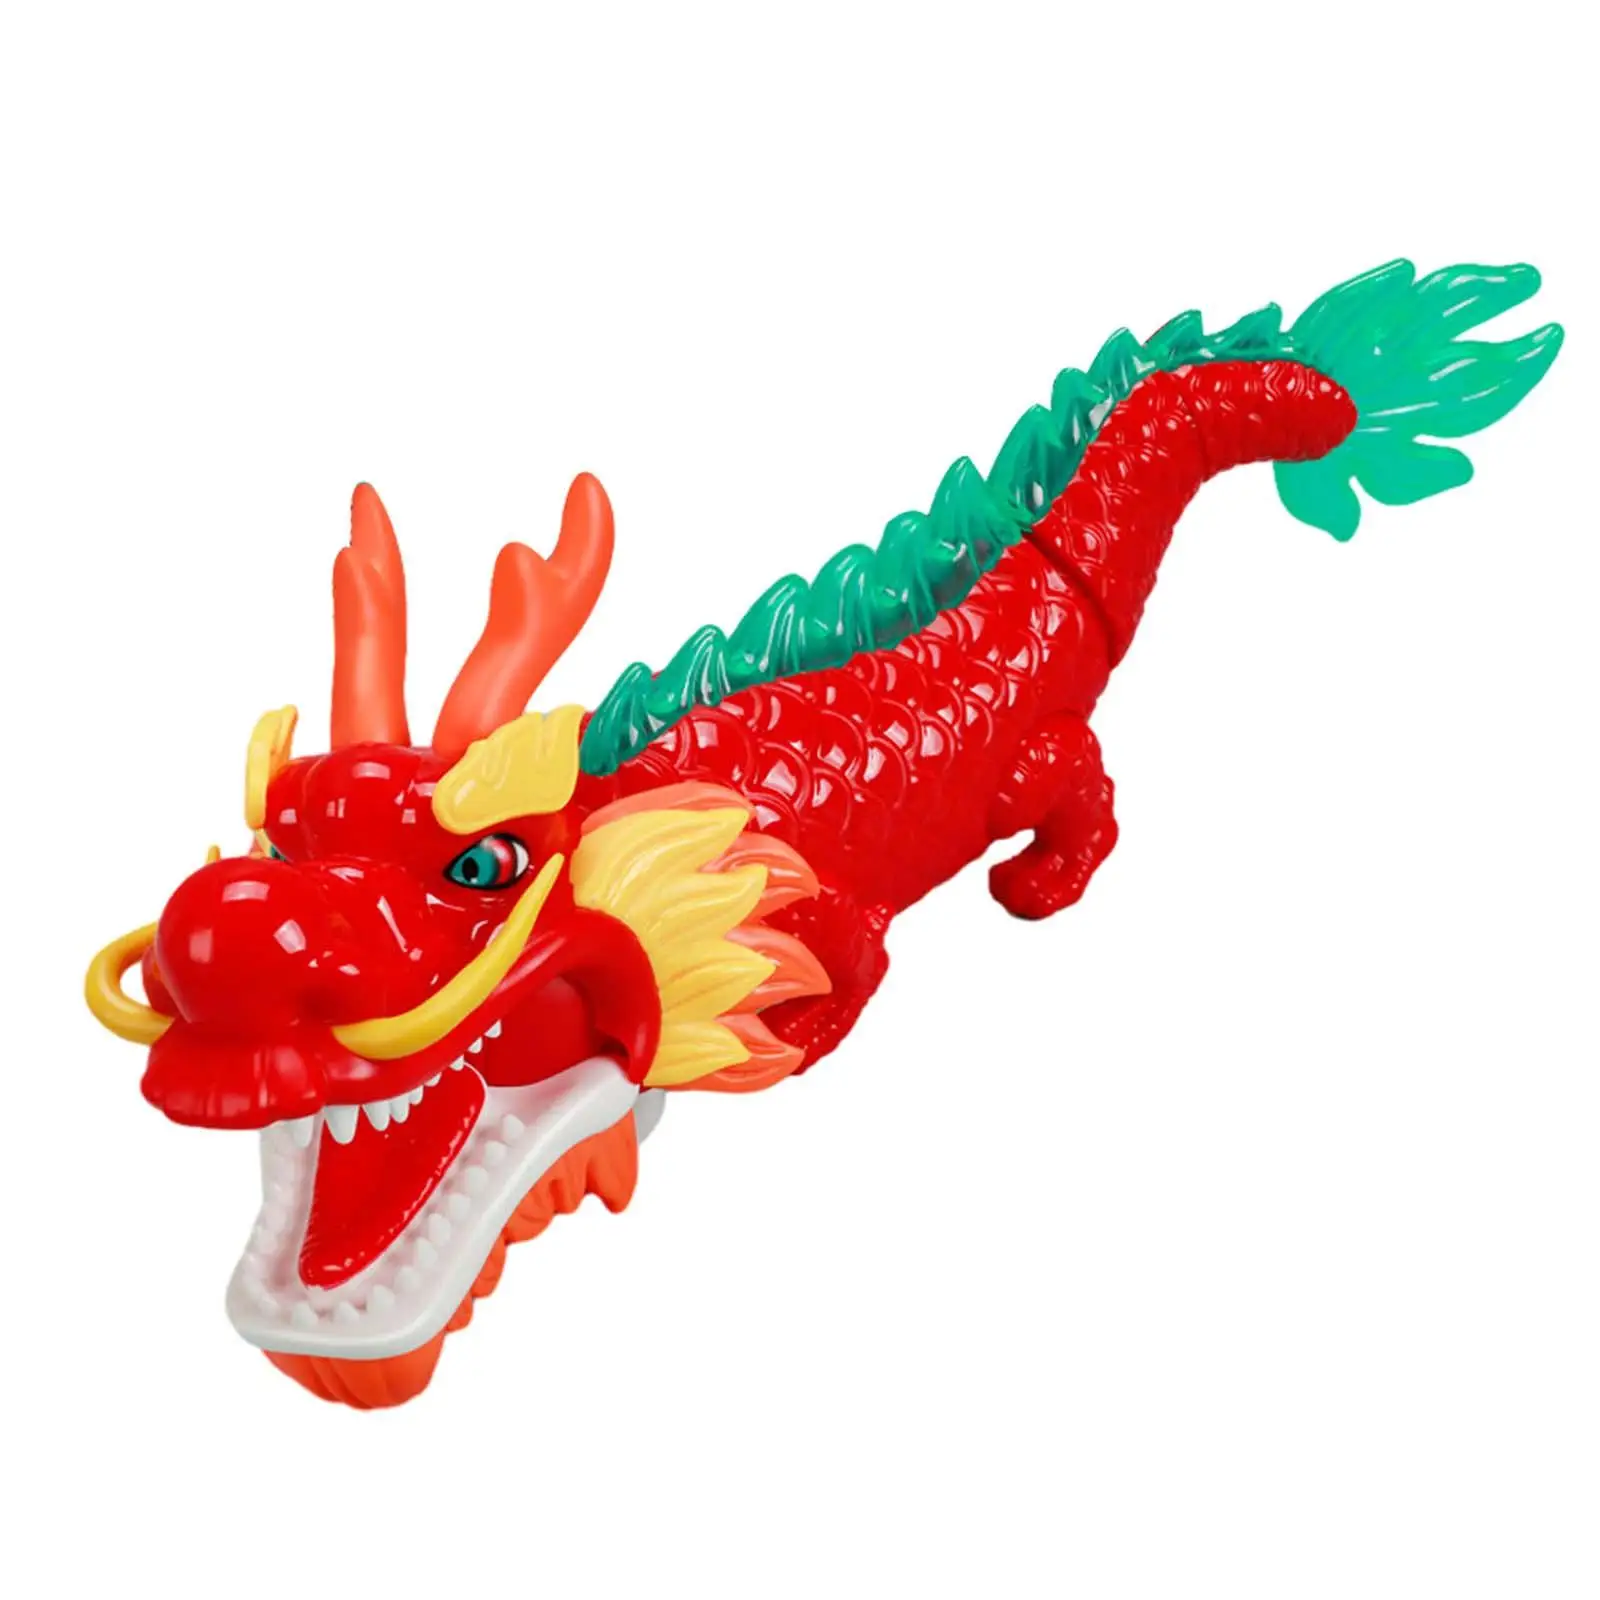 Electric Chinese Dragon Toy Interactive with Music and Lights Educational for Ages 1 2 3 Years Old Baby Kids Children Boys Girls